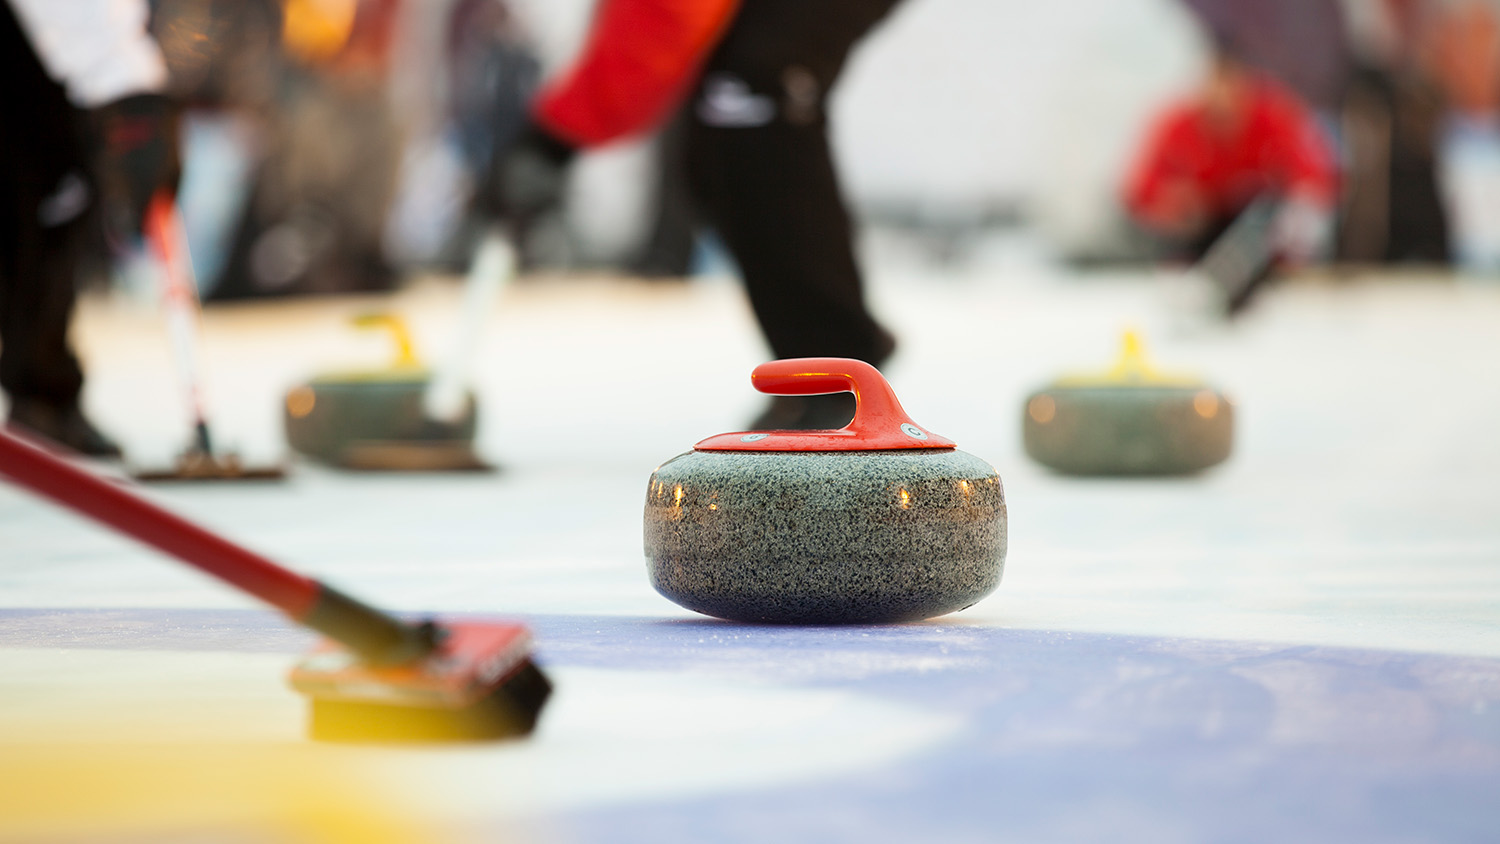 Curling stones on ice - New Study Looks at Modern Trends in One of the World's Oldest Sports - College of Natural Resources News NC State University